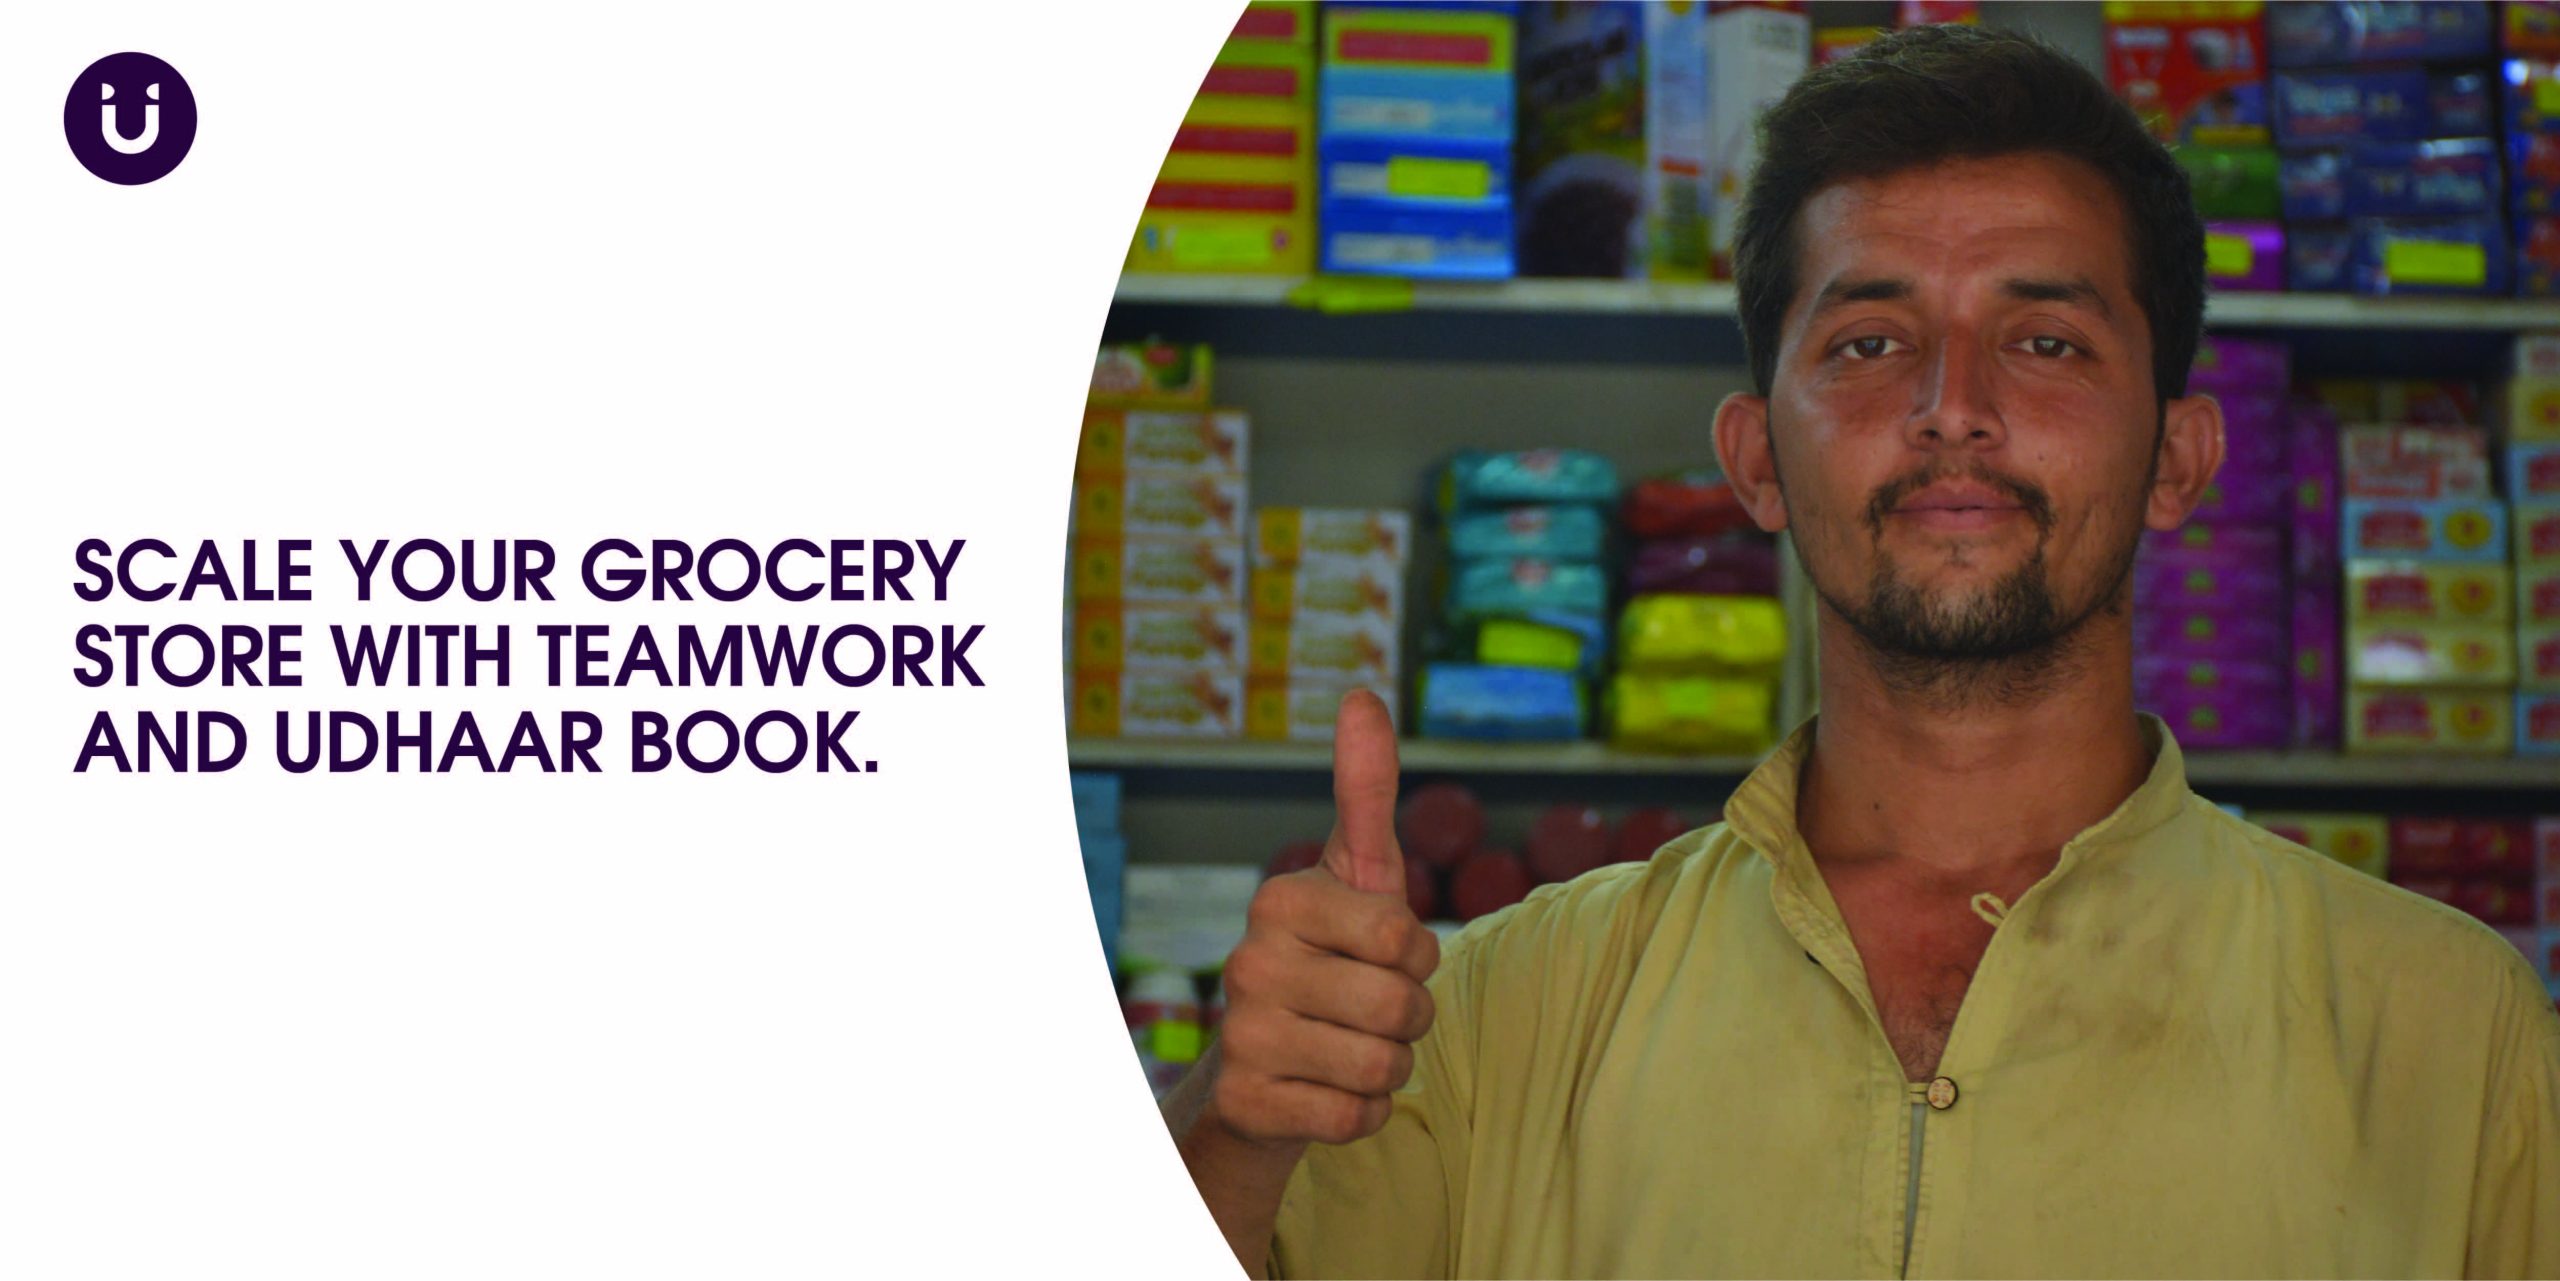 Scale Your Grocery Store with Teamwork and Udhaar Book